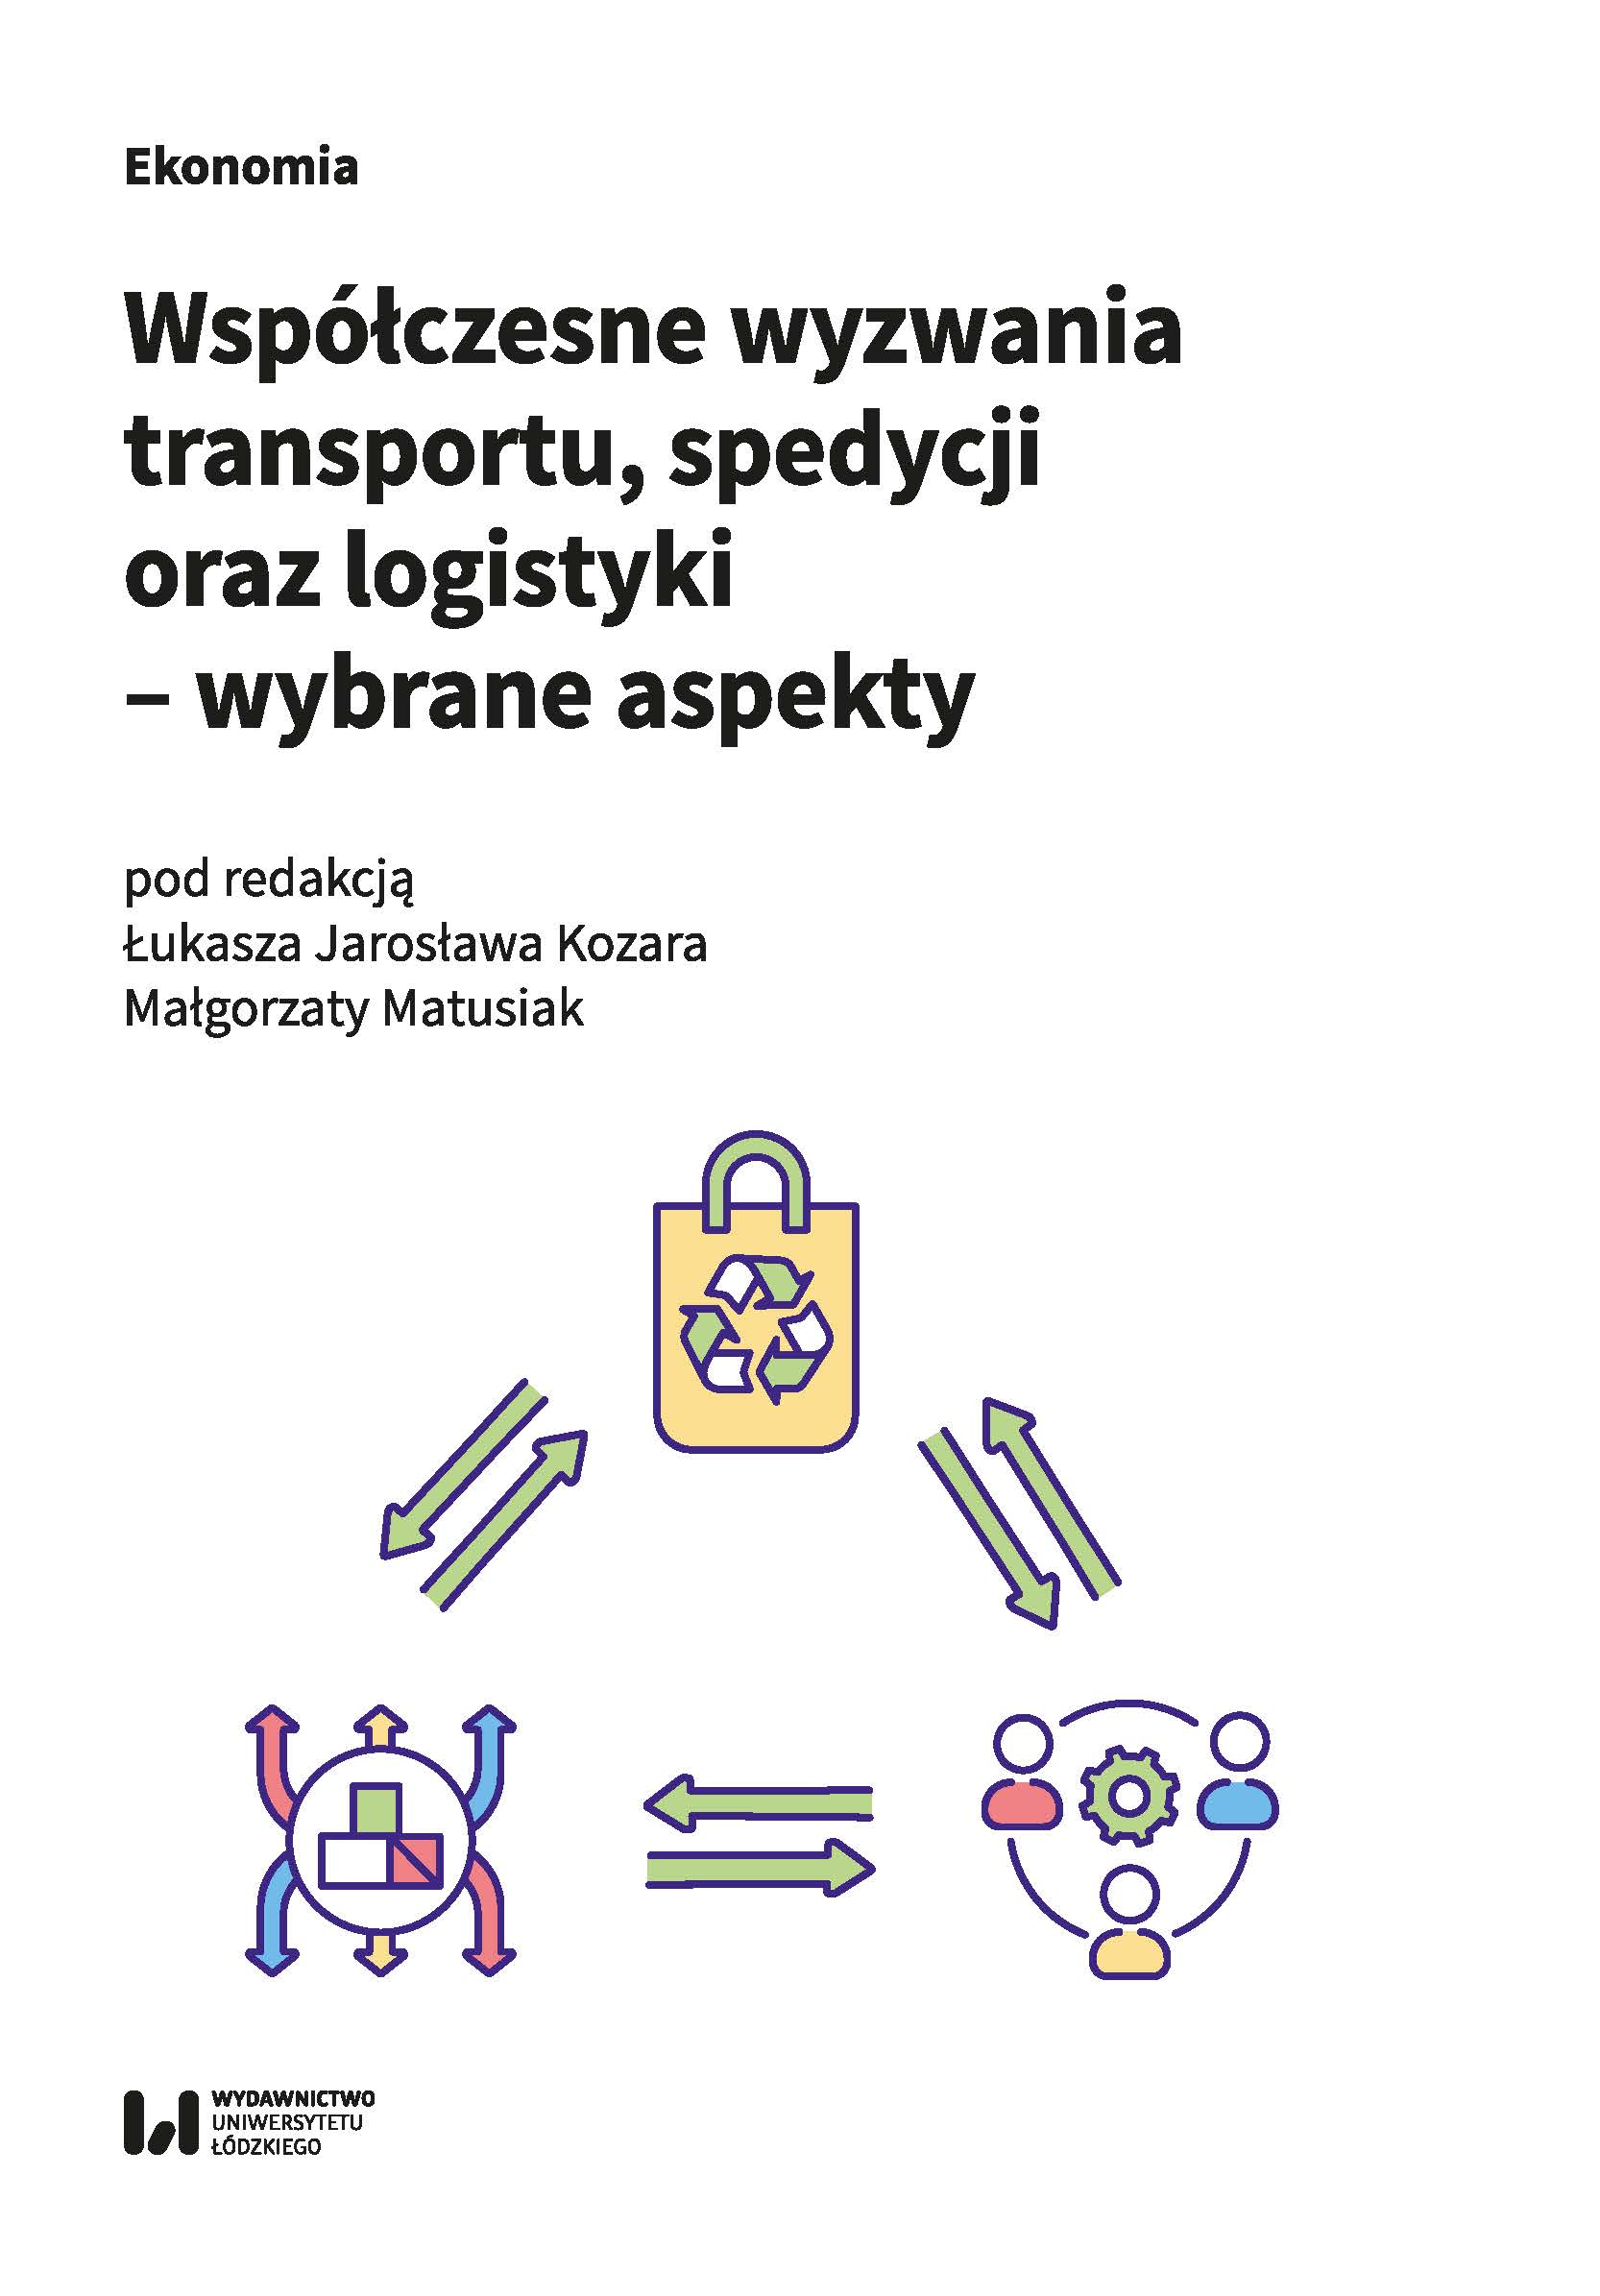 The e-mobility market in road transport of Poland and Germany Cover Image